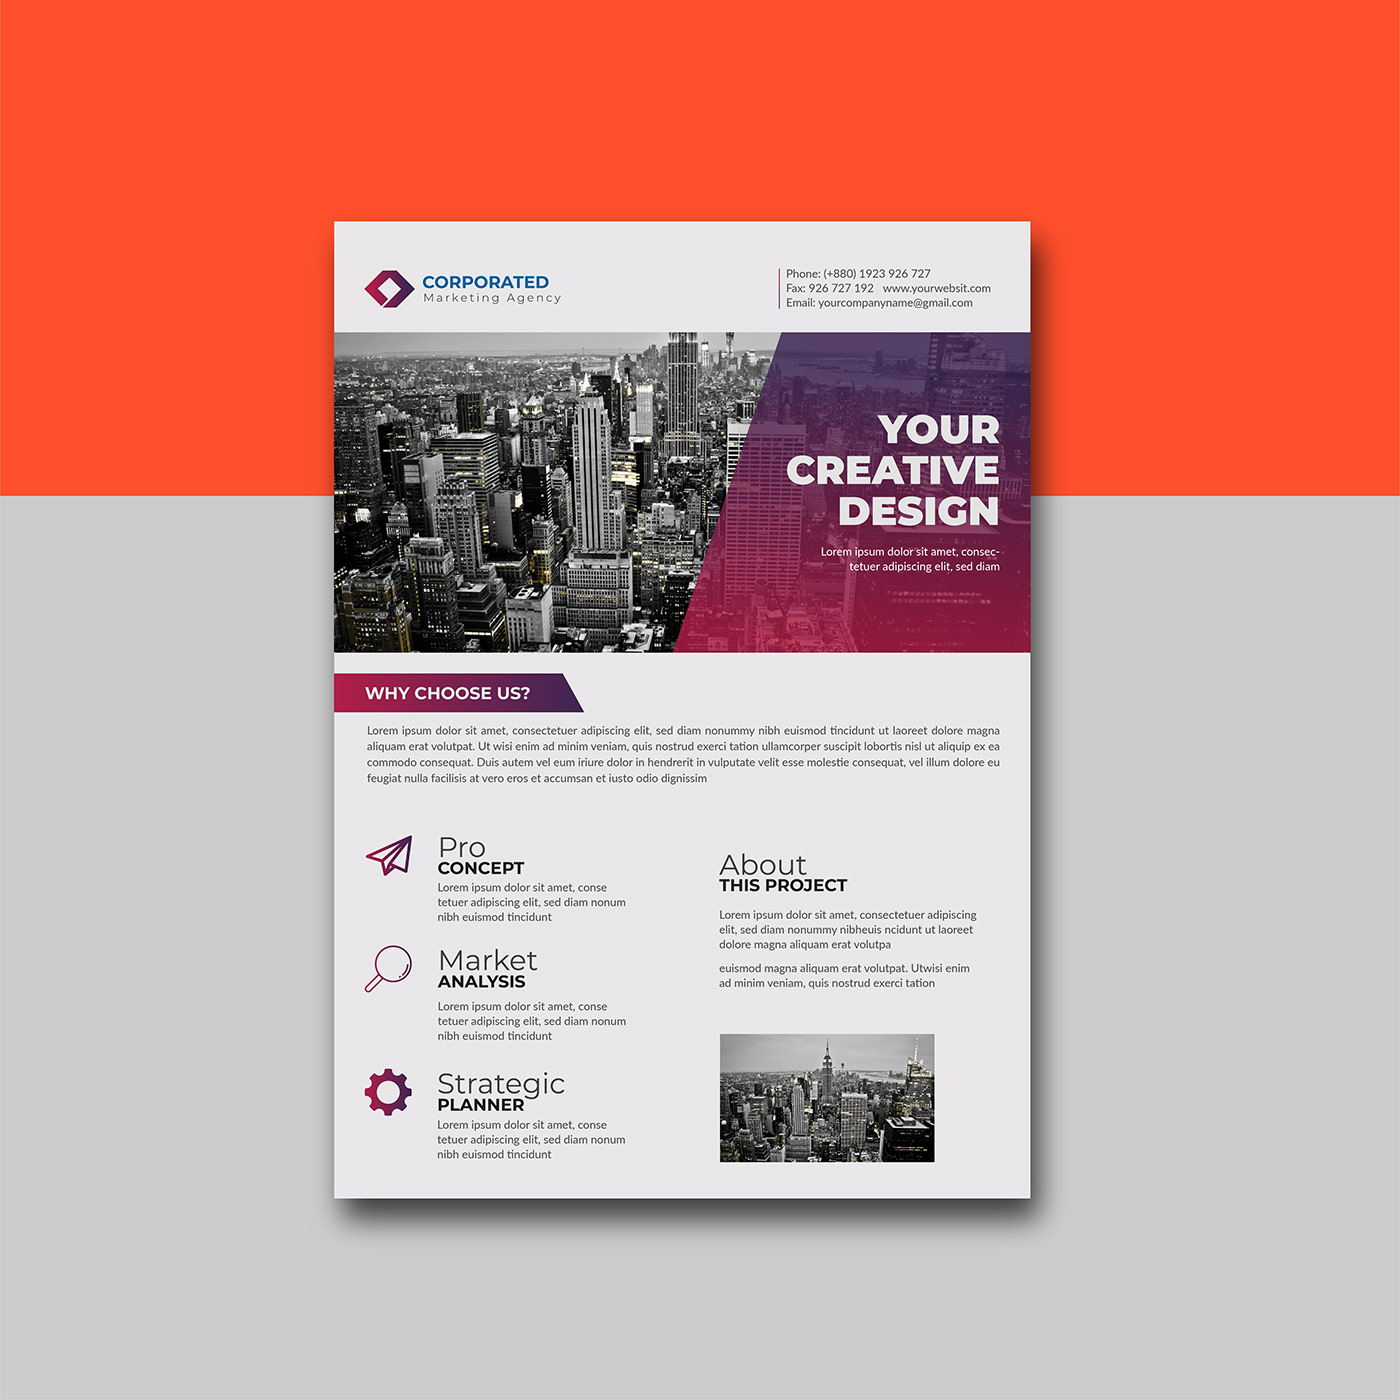 Corporate Flyer Templates free flyer design Flyer Design Branding design flyer design vector flyer design in Illustrator free design